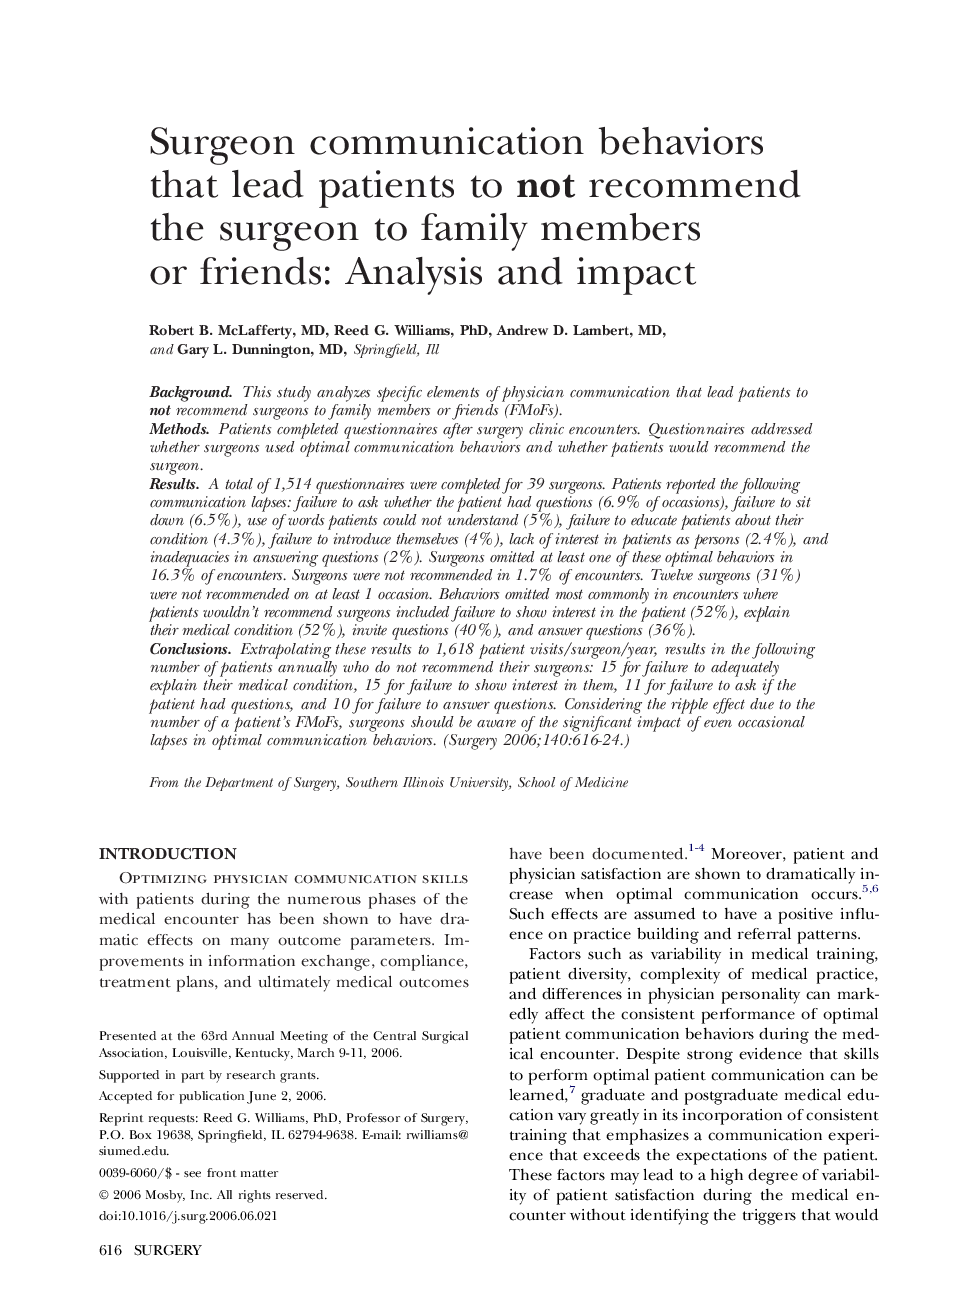 Surgeon communication behaviors that lead patients to not recommend the surgeon to family members or friends: Analysis and impact 